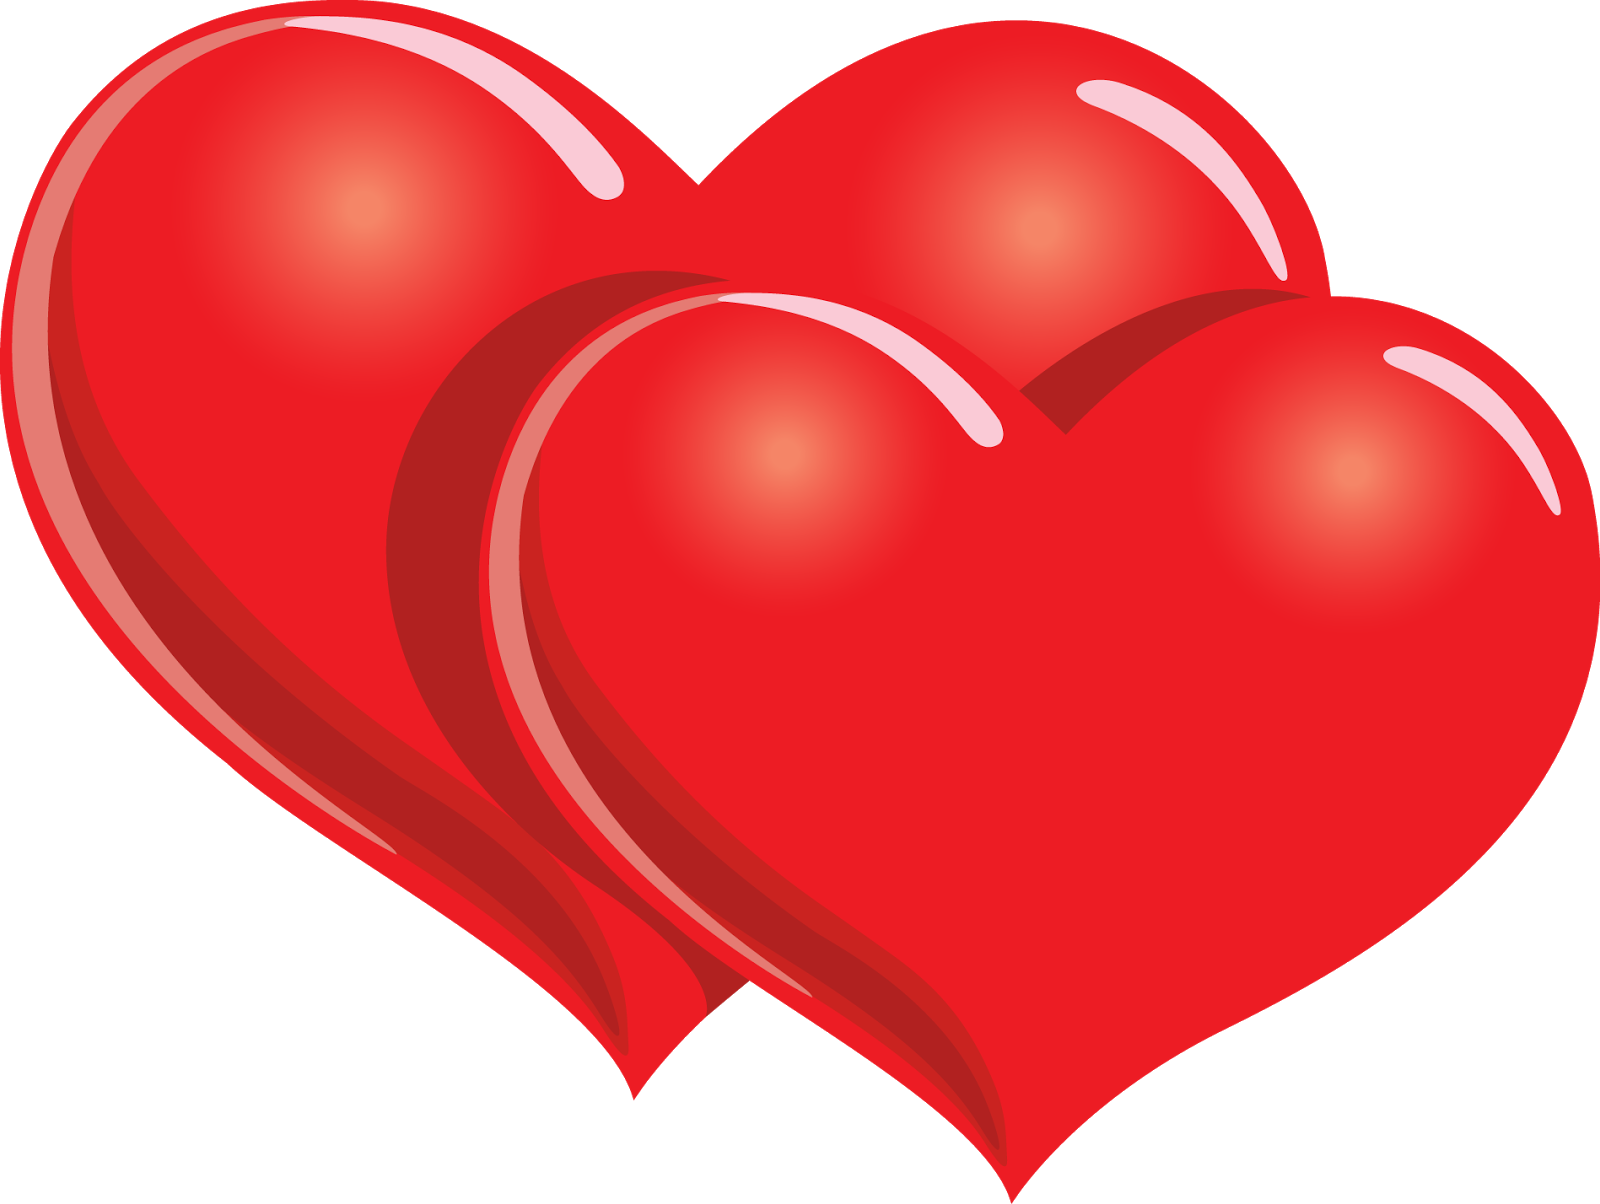 Love Heart Images, Pictures, Wallpaper Download Free | Happy ...